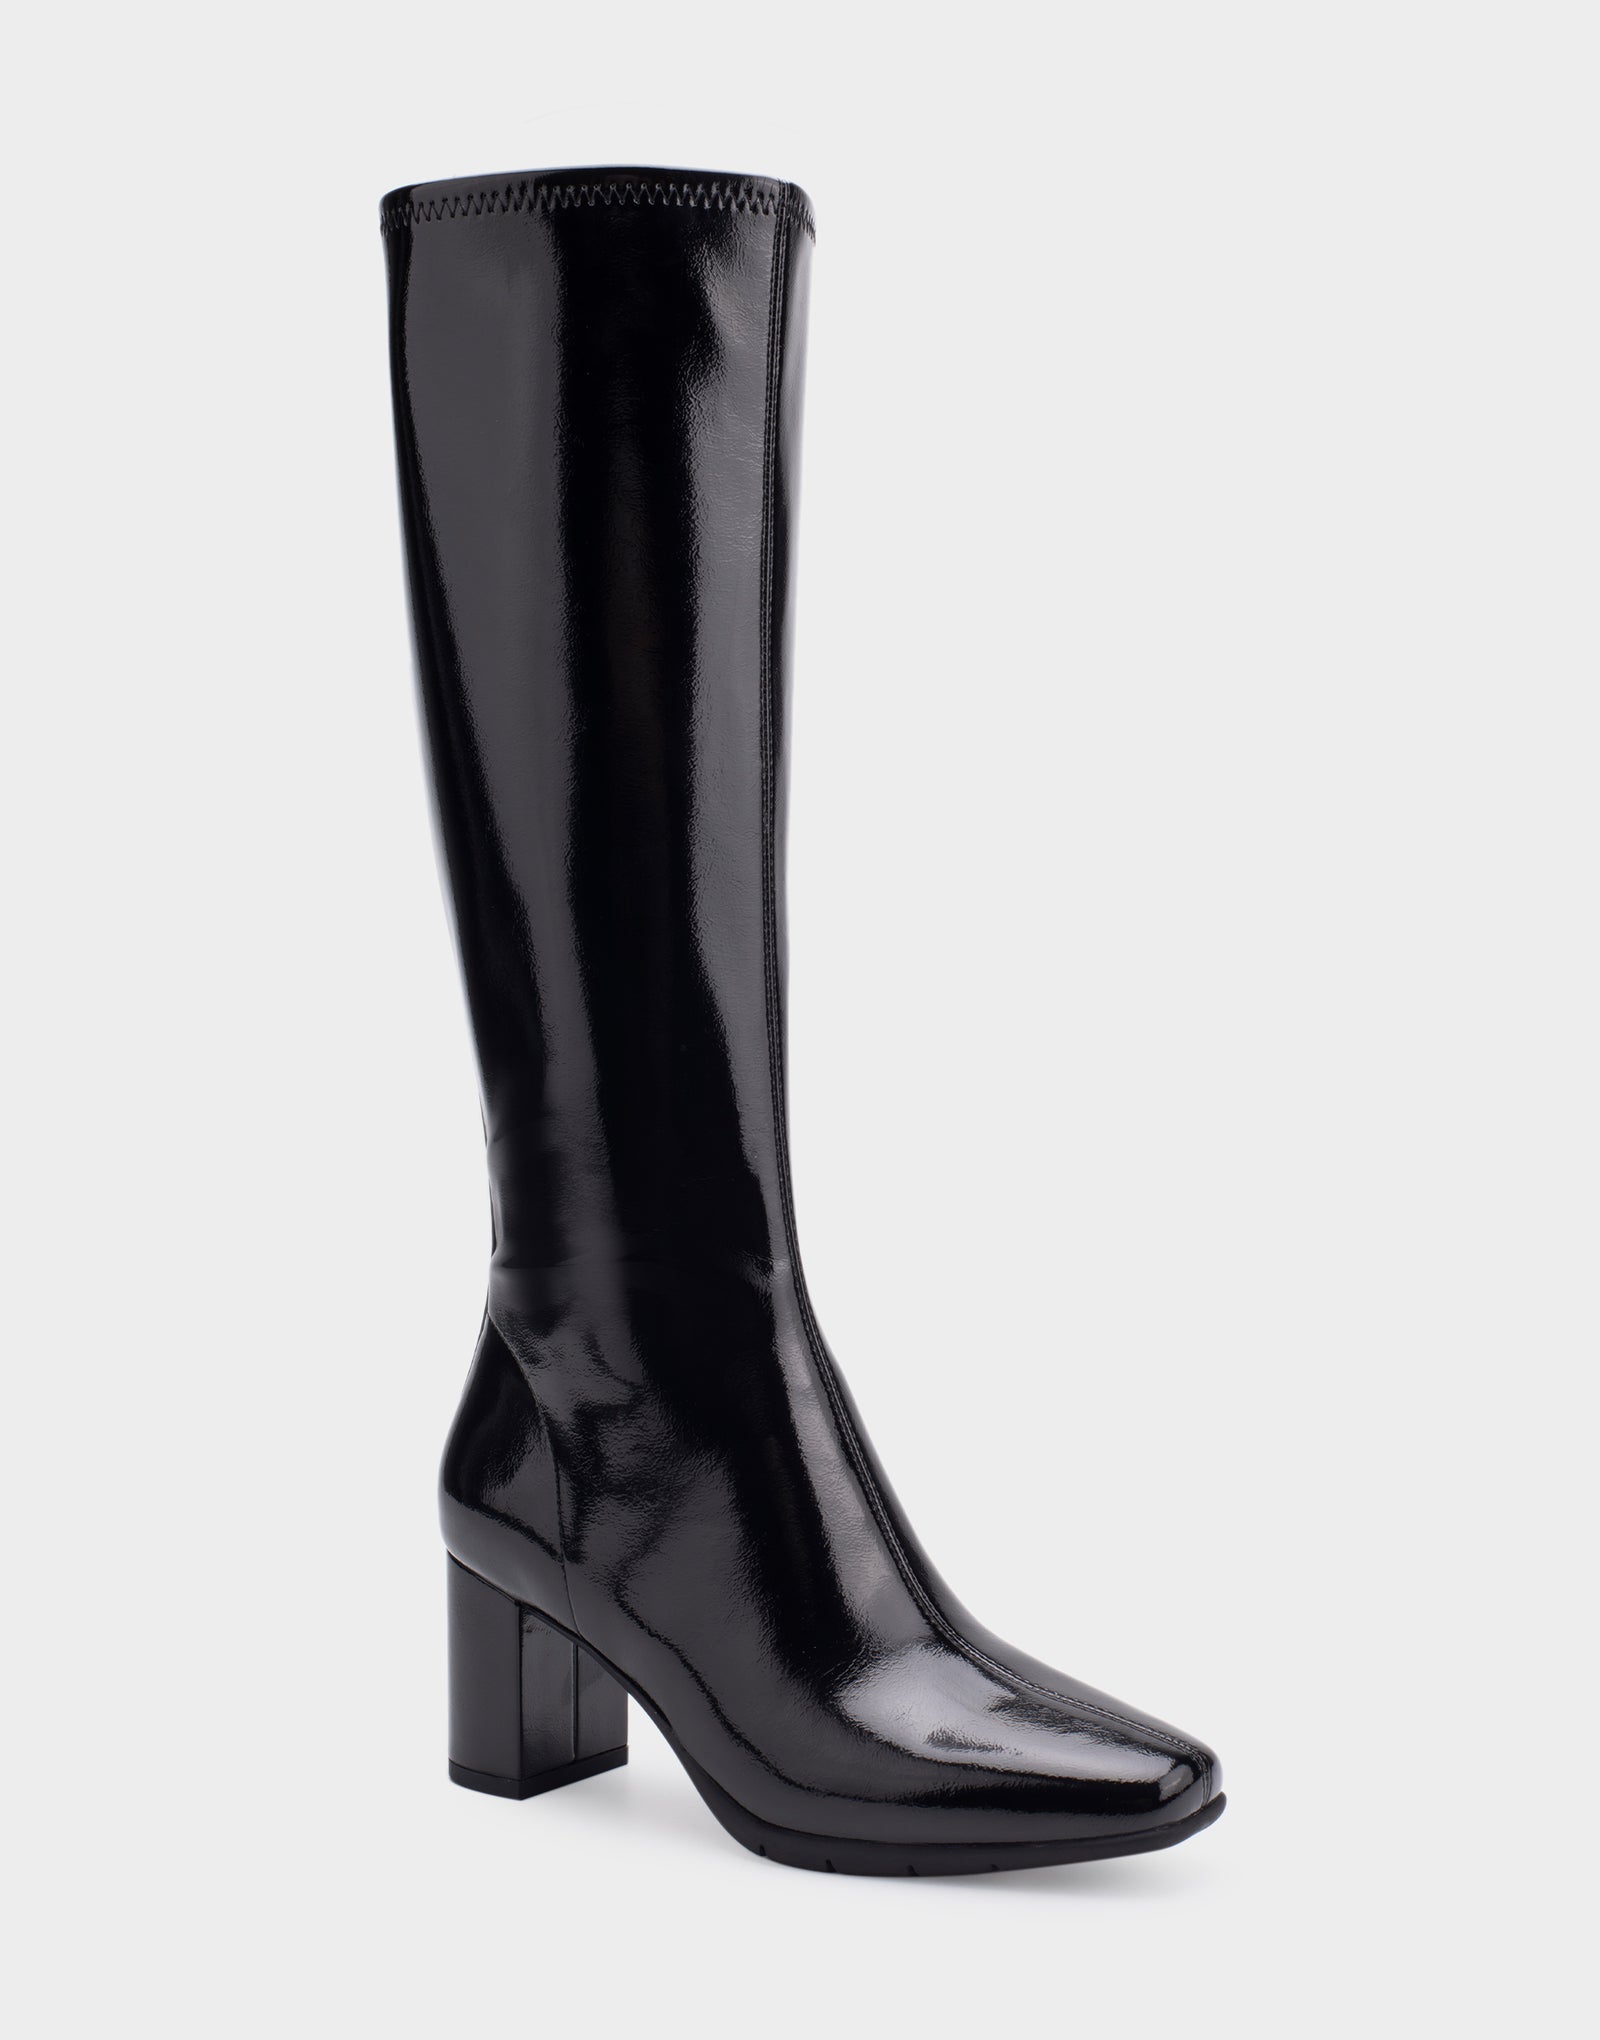 Micah Black Patent Faux Leather Heeled Tall Shaft Boot – Aerosoles